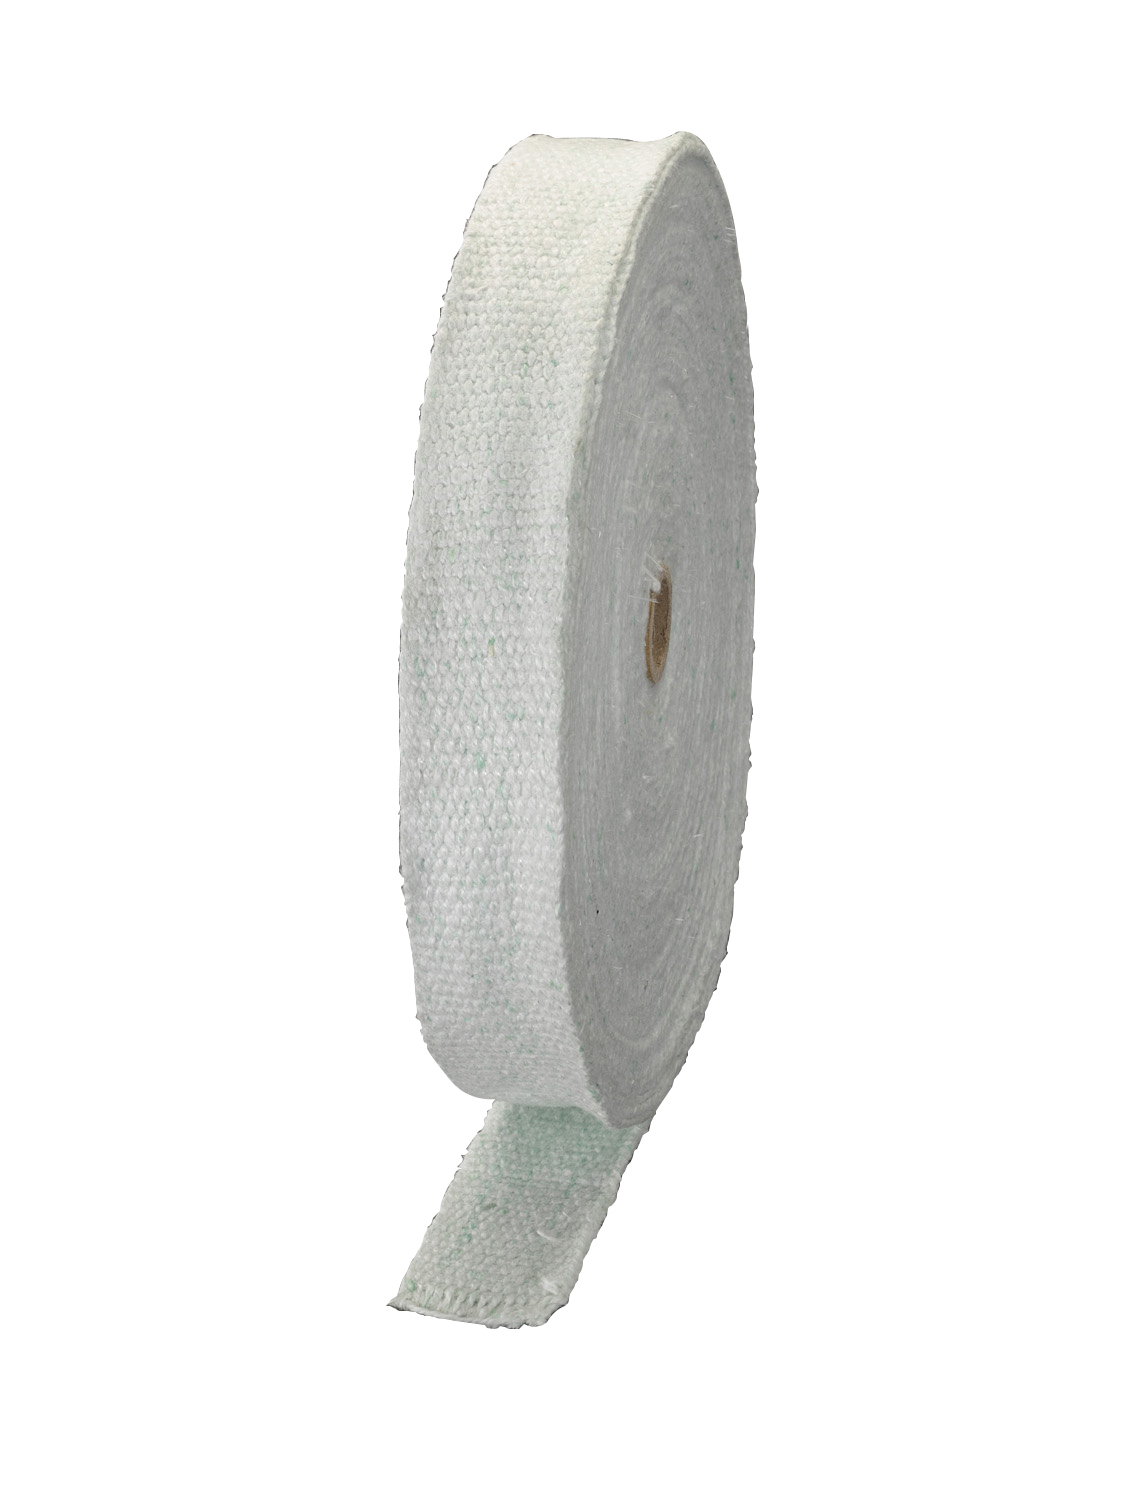 Ceramic Insulated Tape (Not subject to RCF regulations)